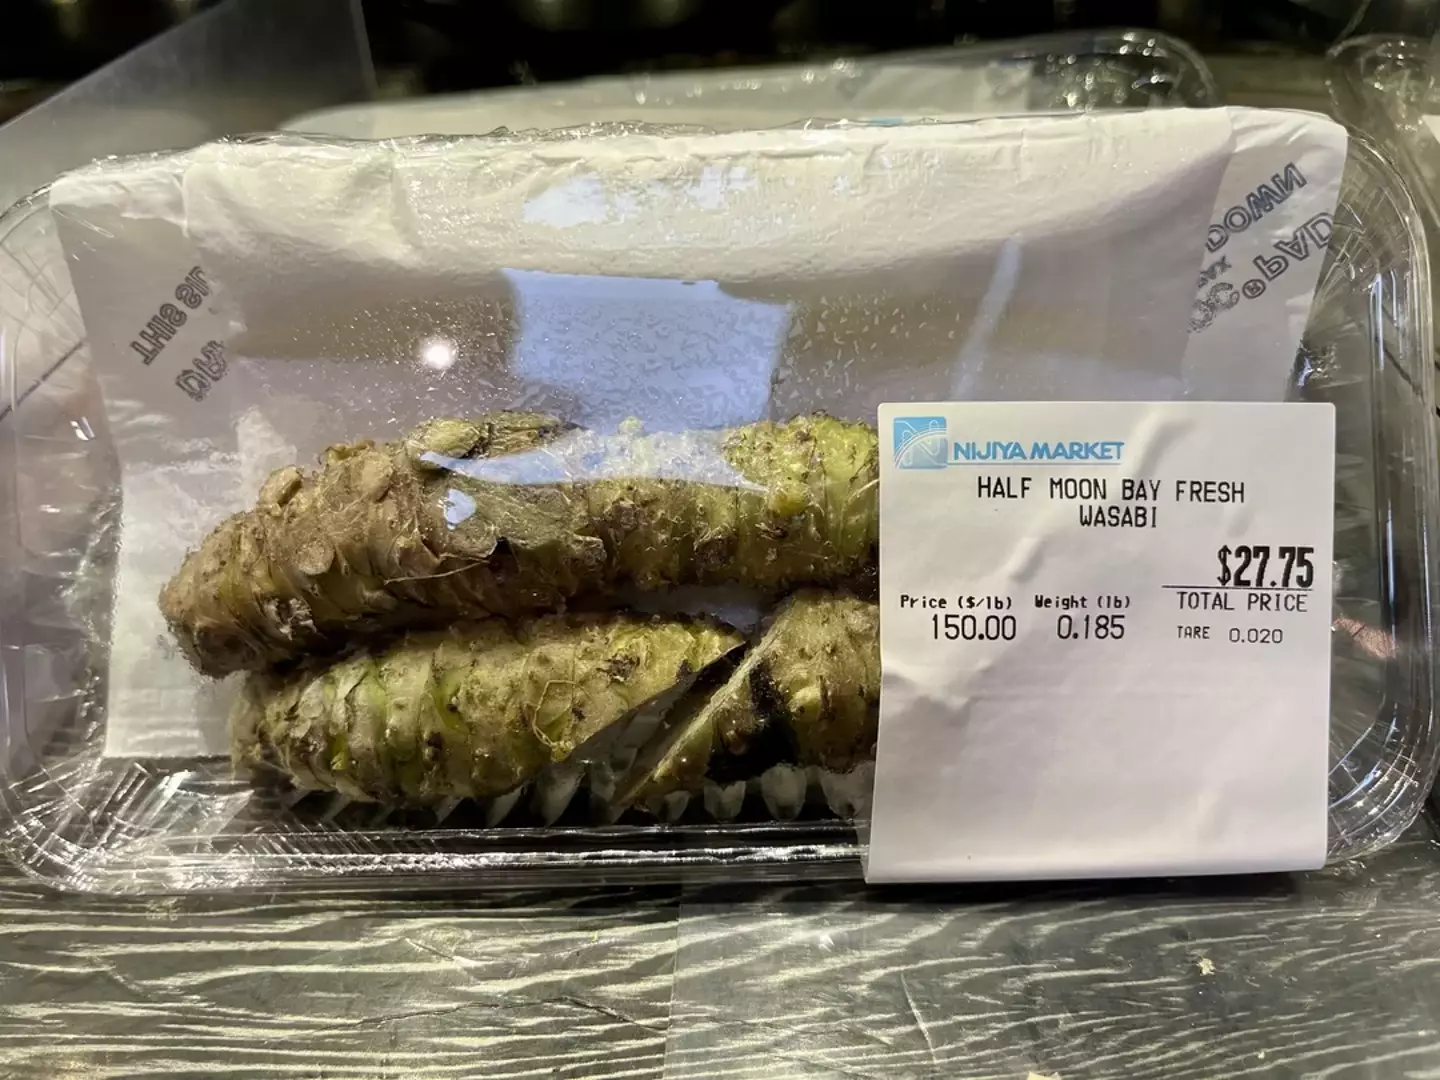 The real price of wasabi is enormous!